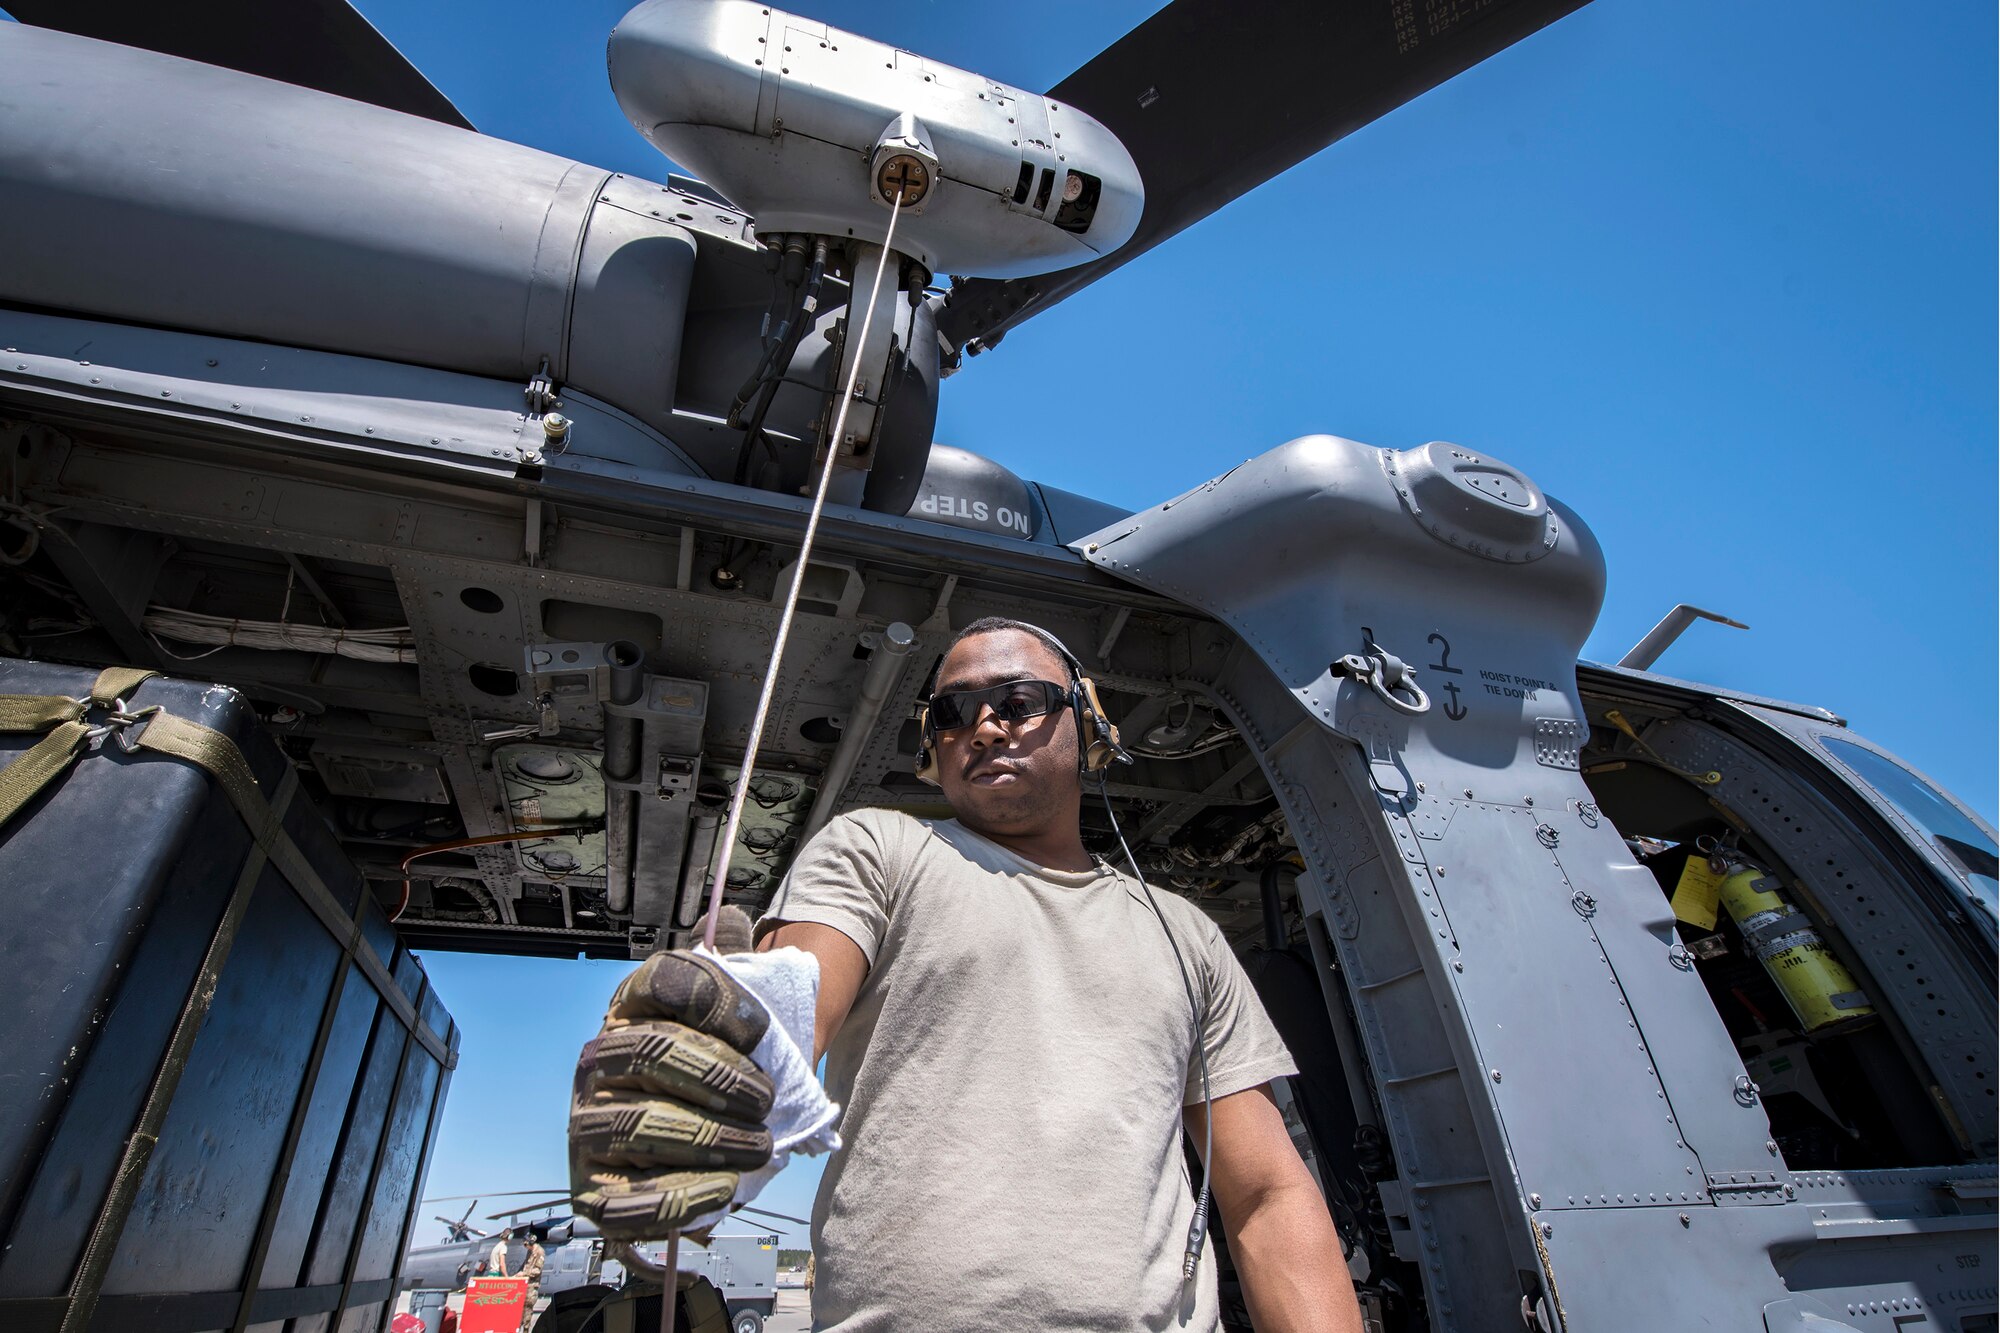 Senior Airman Latrell Solomon, 41st Rescue Squadron (RQS) special missions aviator, wipes the rappel wire of an HH-60G Pave Hawk, March 15, 2018, at Moody Air Force Base, Ga. Airmen from the 41st RQS and 723d Aircraft Maintenance Squadron conducted pre-flight checks to ensure that an HH-60G Pave Hawk was fully prepared for a simulated combat search and rescue mission. (U.S. Air Force photo by Airman Eugene Oliver)